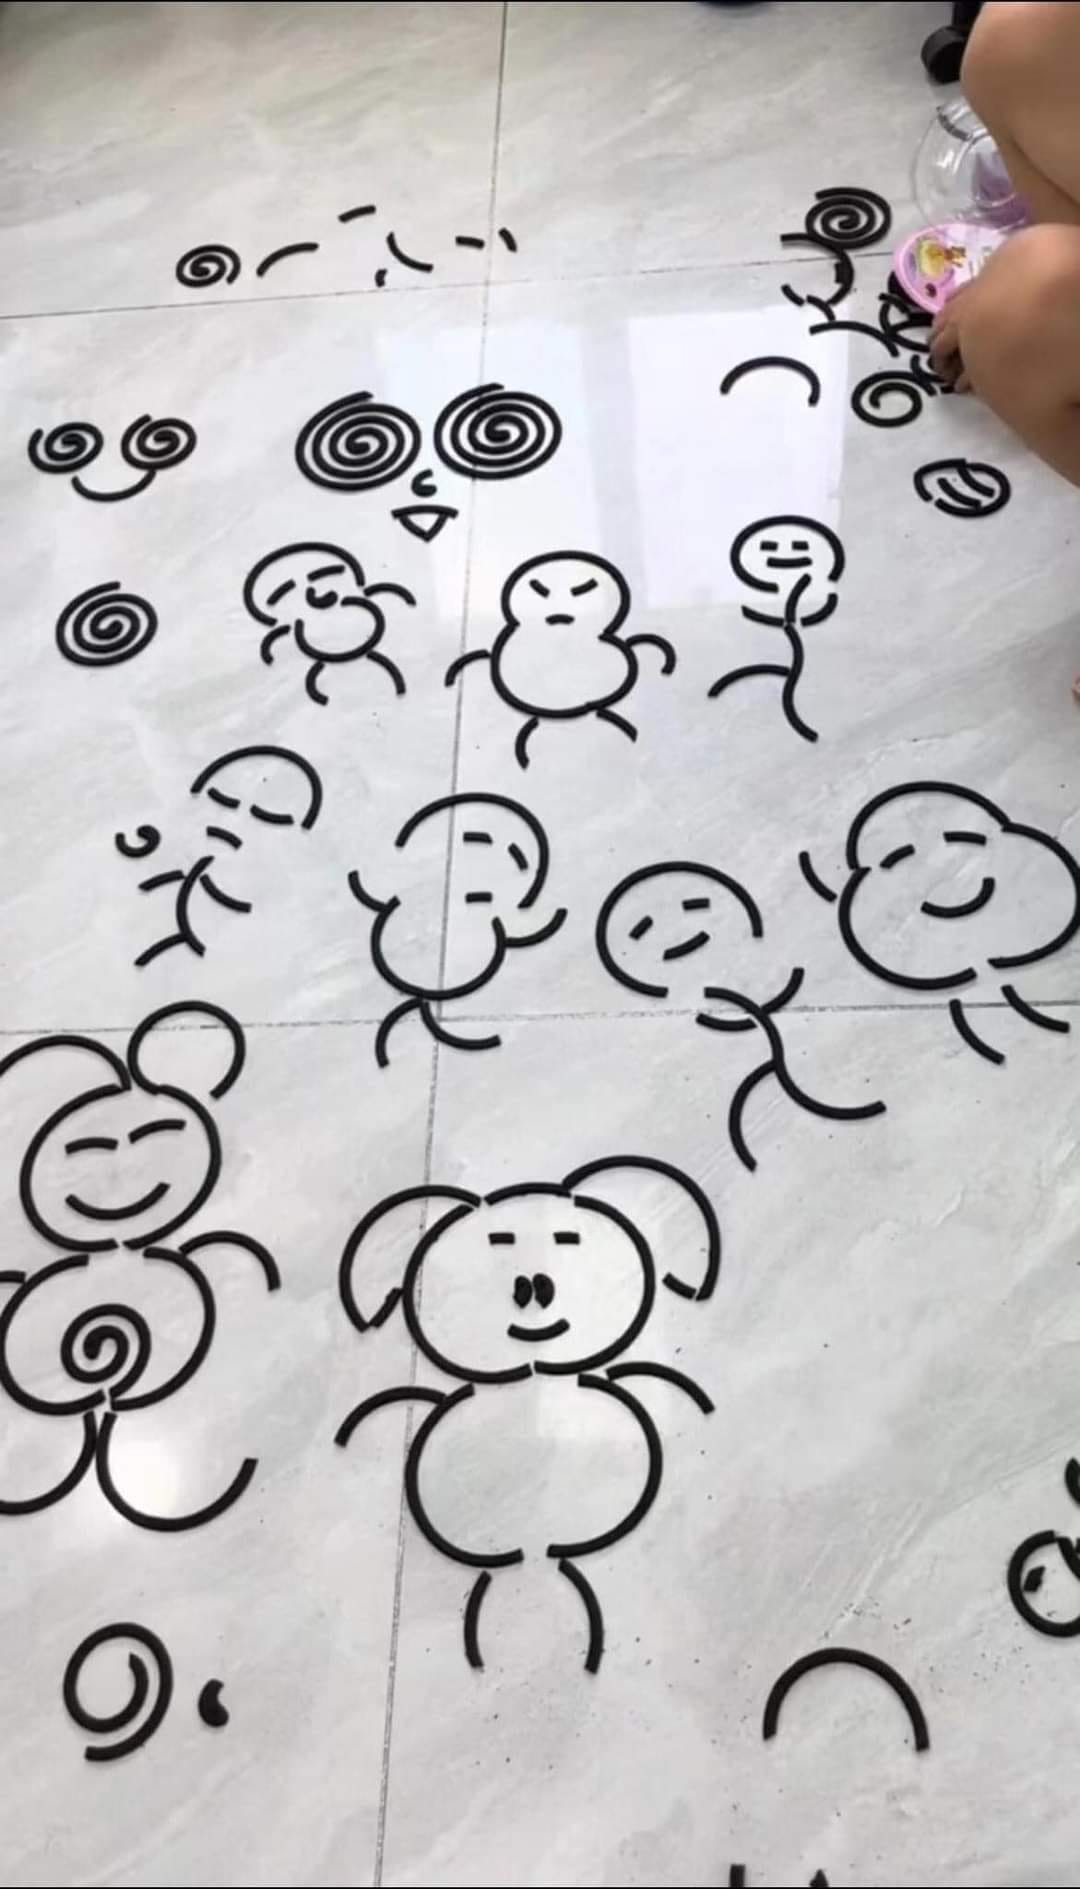 M'sian boy uses mosquito coils to create cute arts, wins praises online3